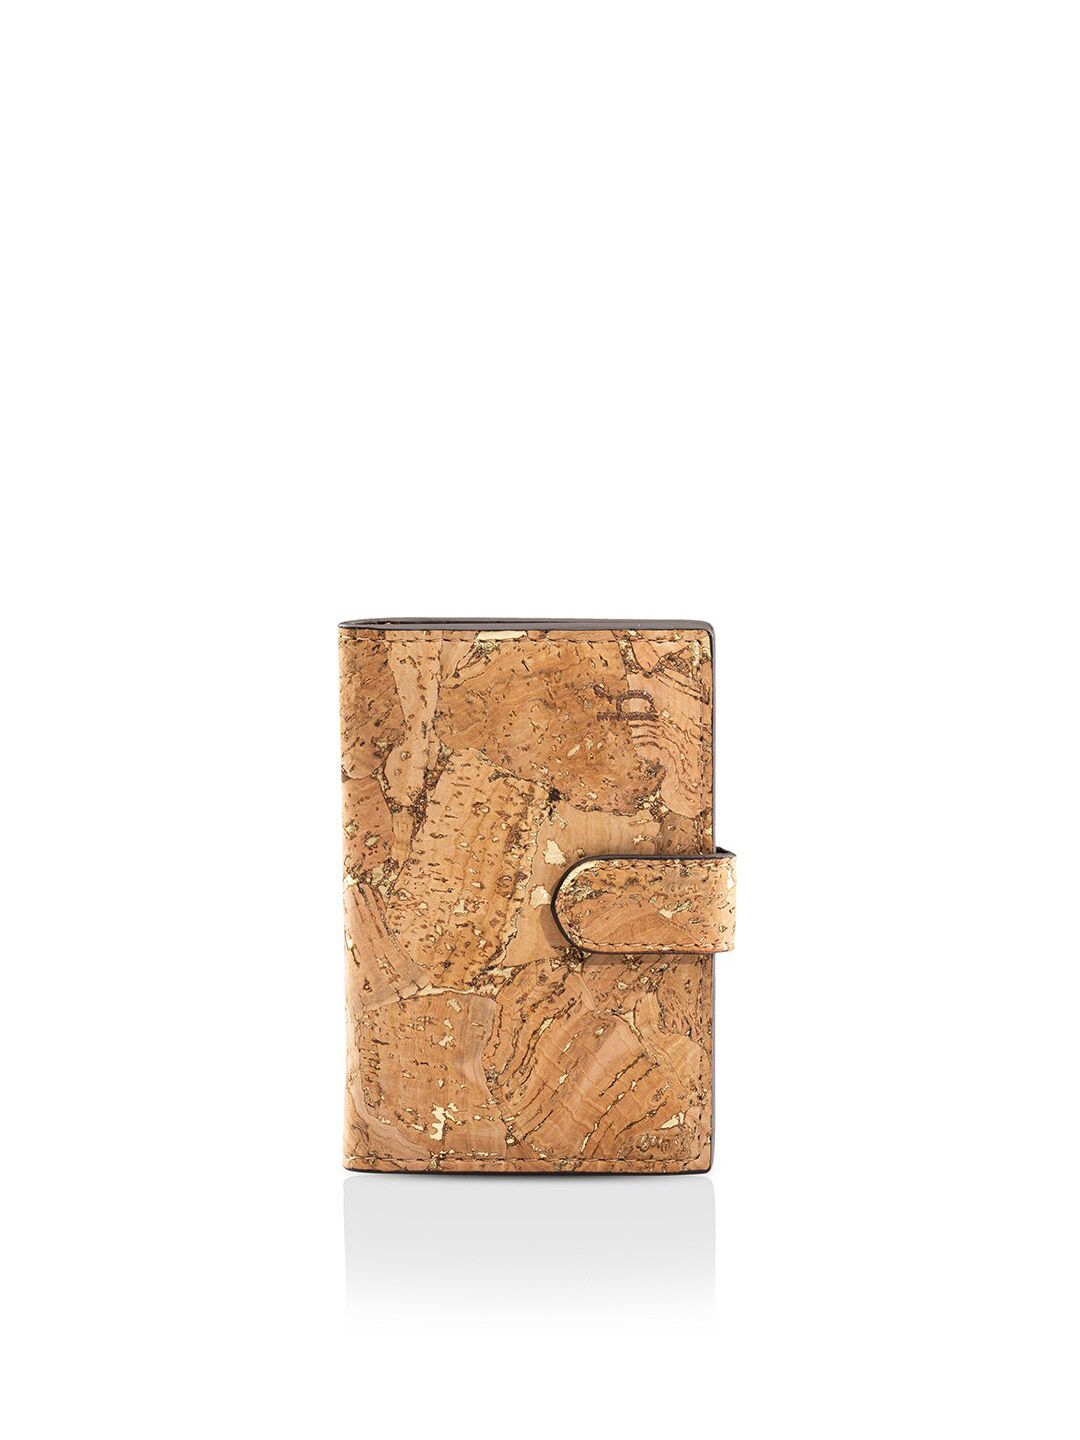 Beej Unisex Gold-Toned Textured Two Fold Wallet Price in India